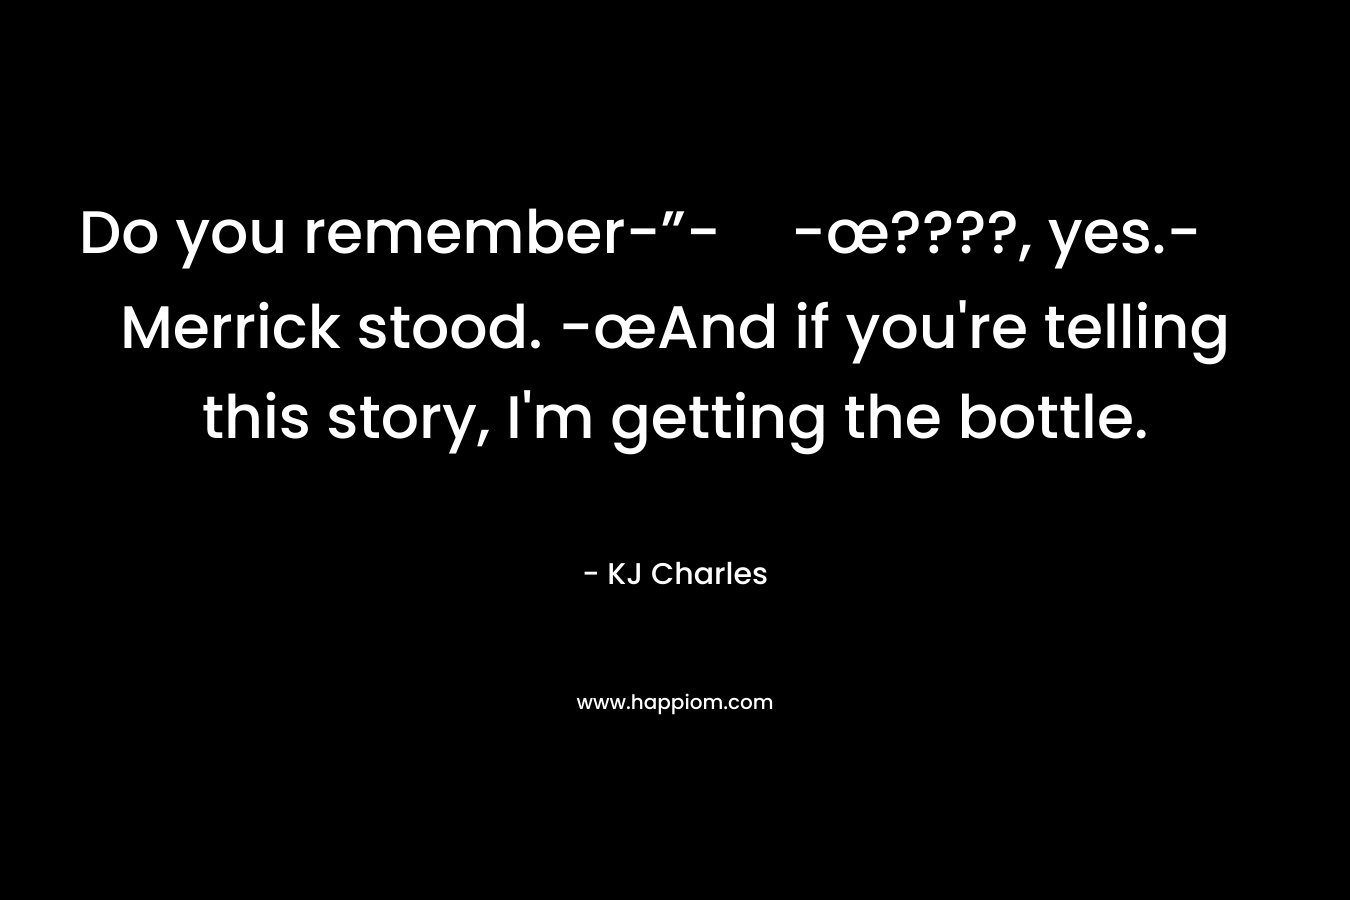 Do you remember-”--œ????, yes.- Merrick stood. -œAnd if you're telling this story, I'm getting the bottle.